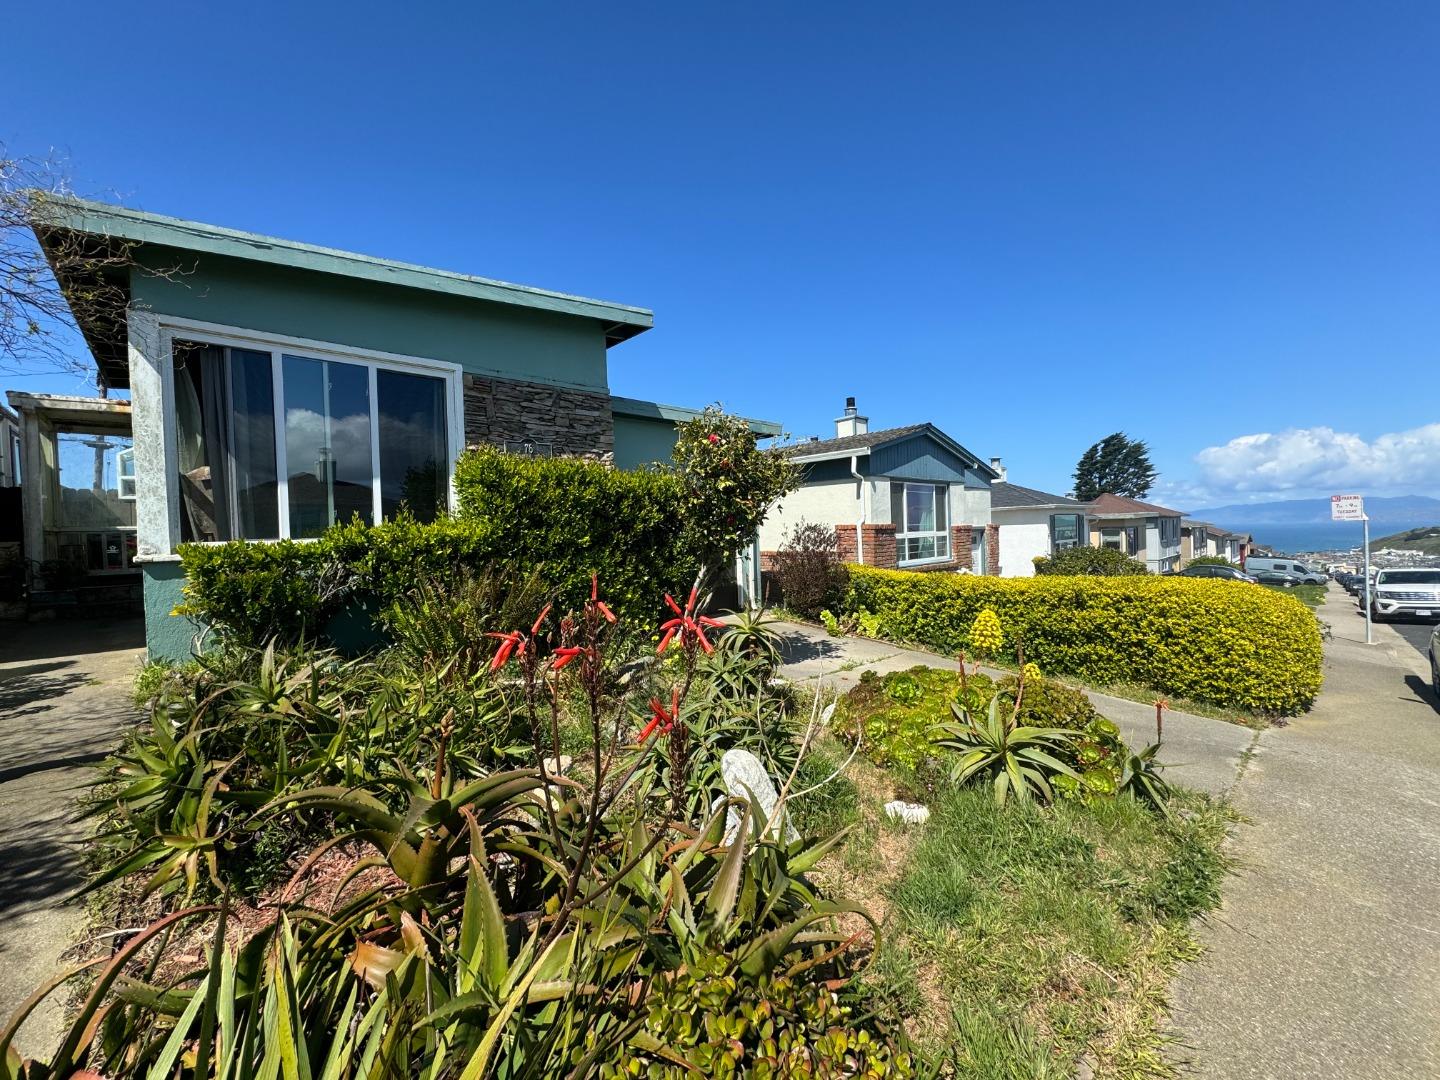 Photo of 76 Oceanside Dr in Daly City, CA